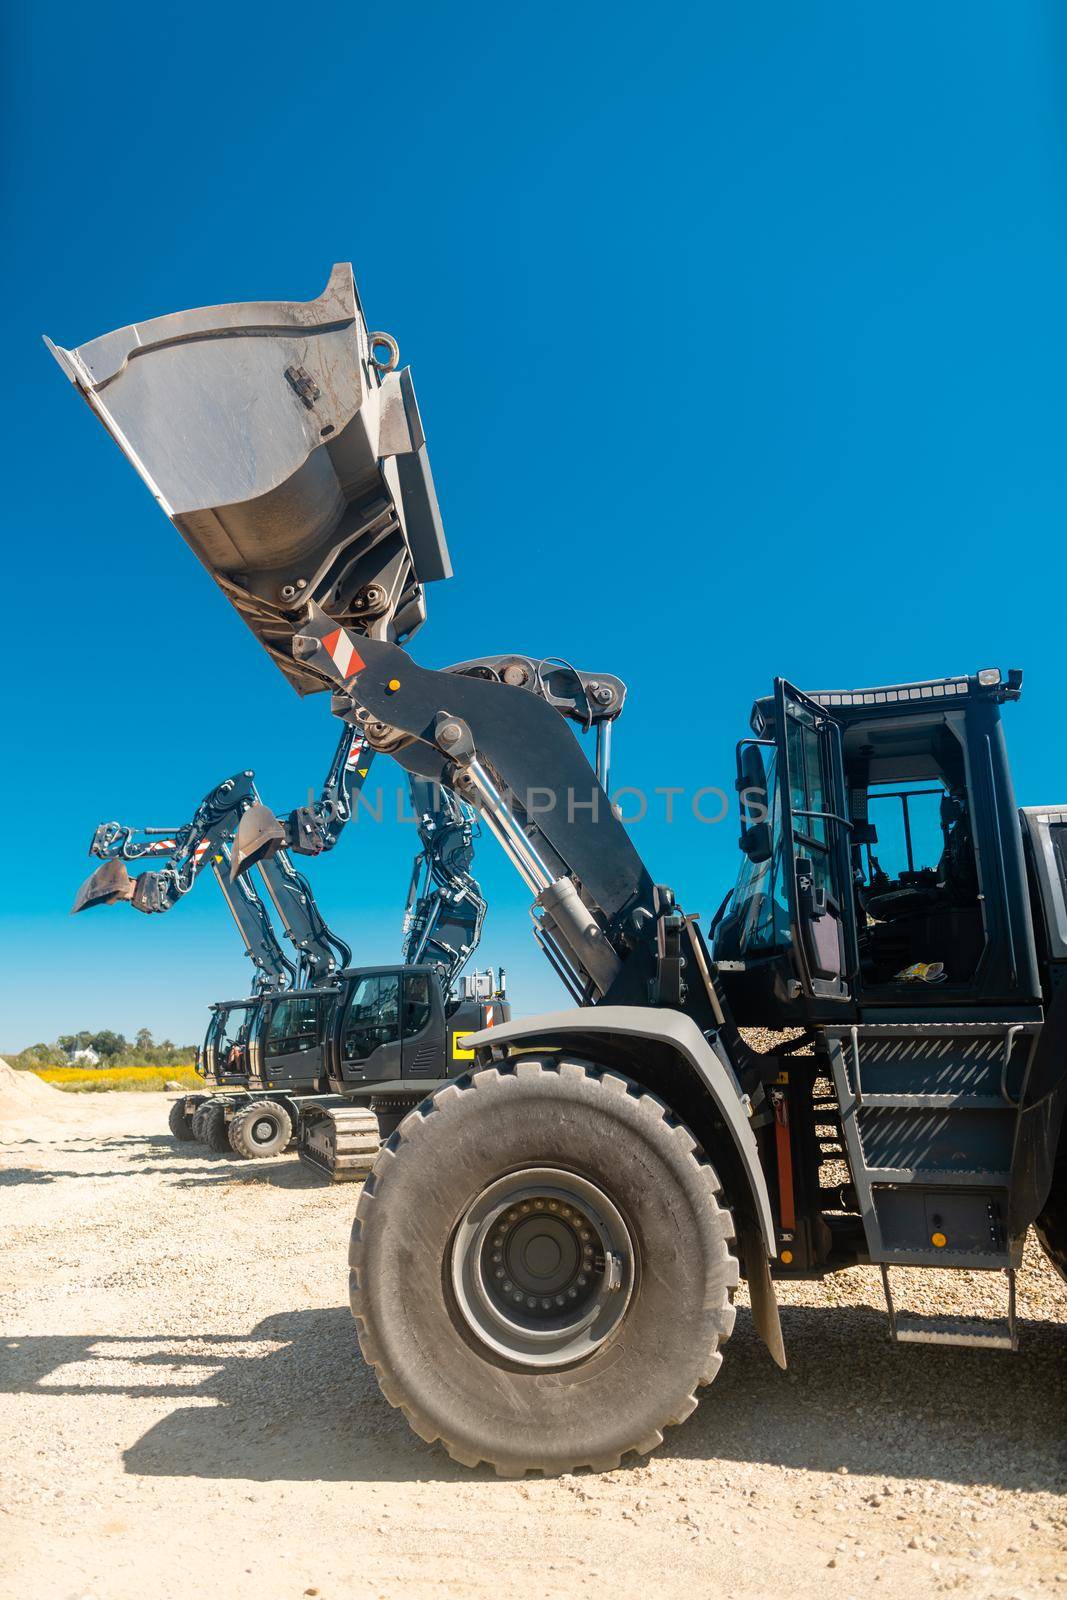 Excavator standing in industrial sand pit ready for work